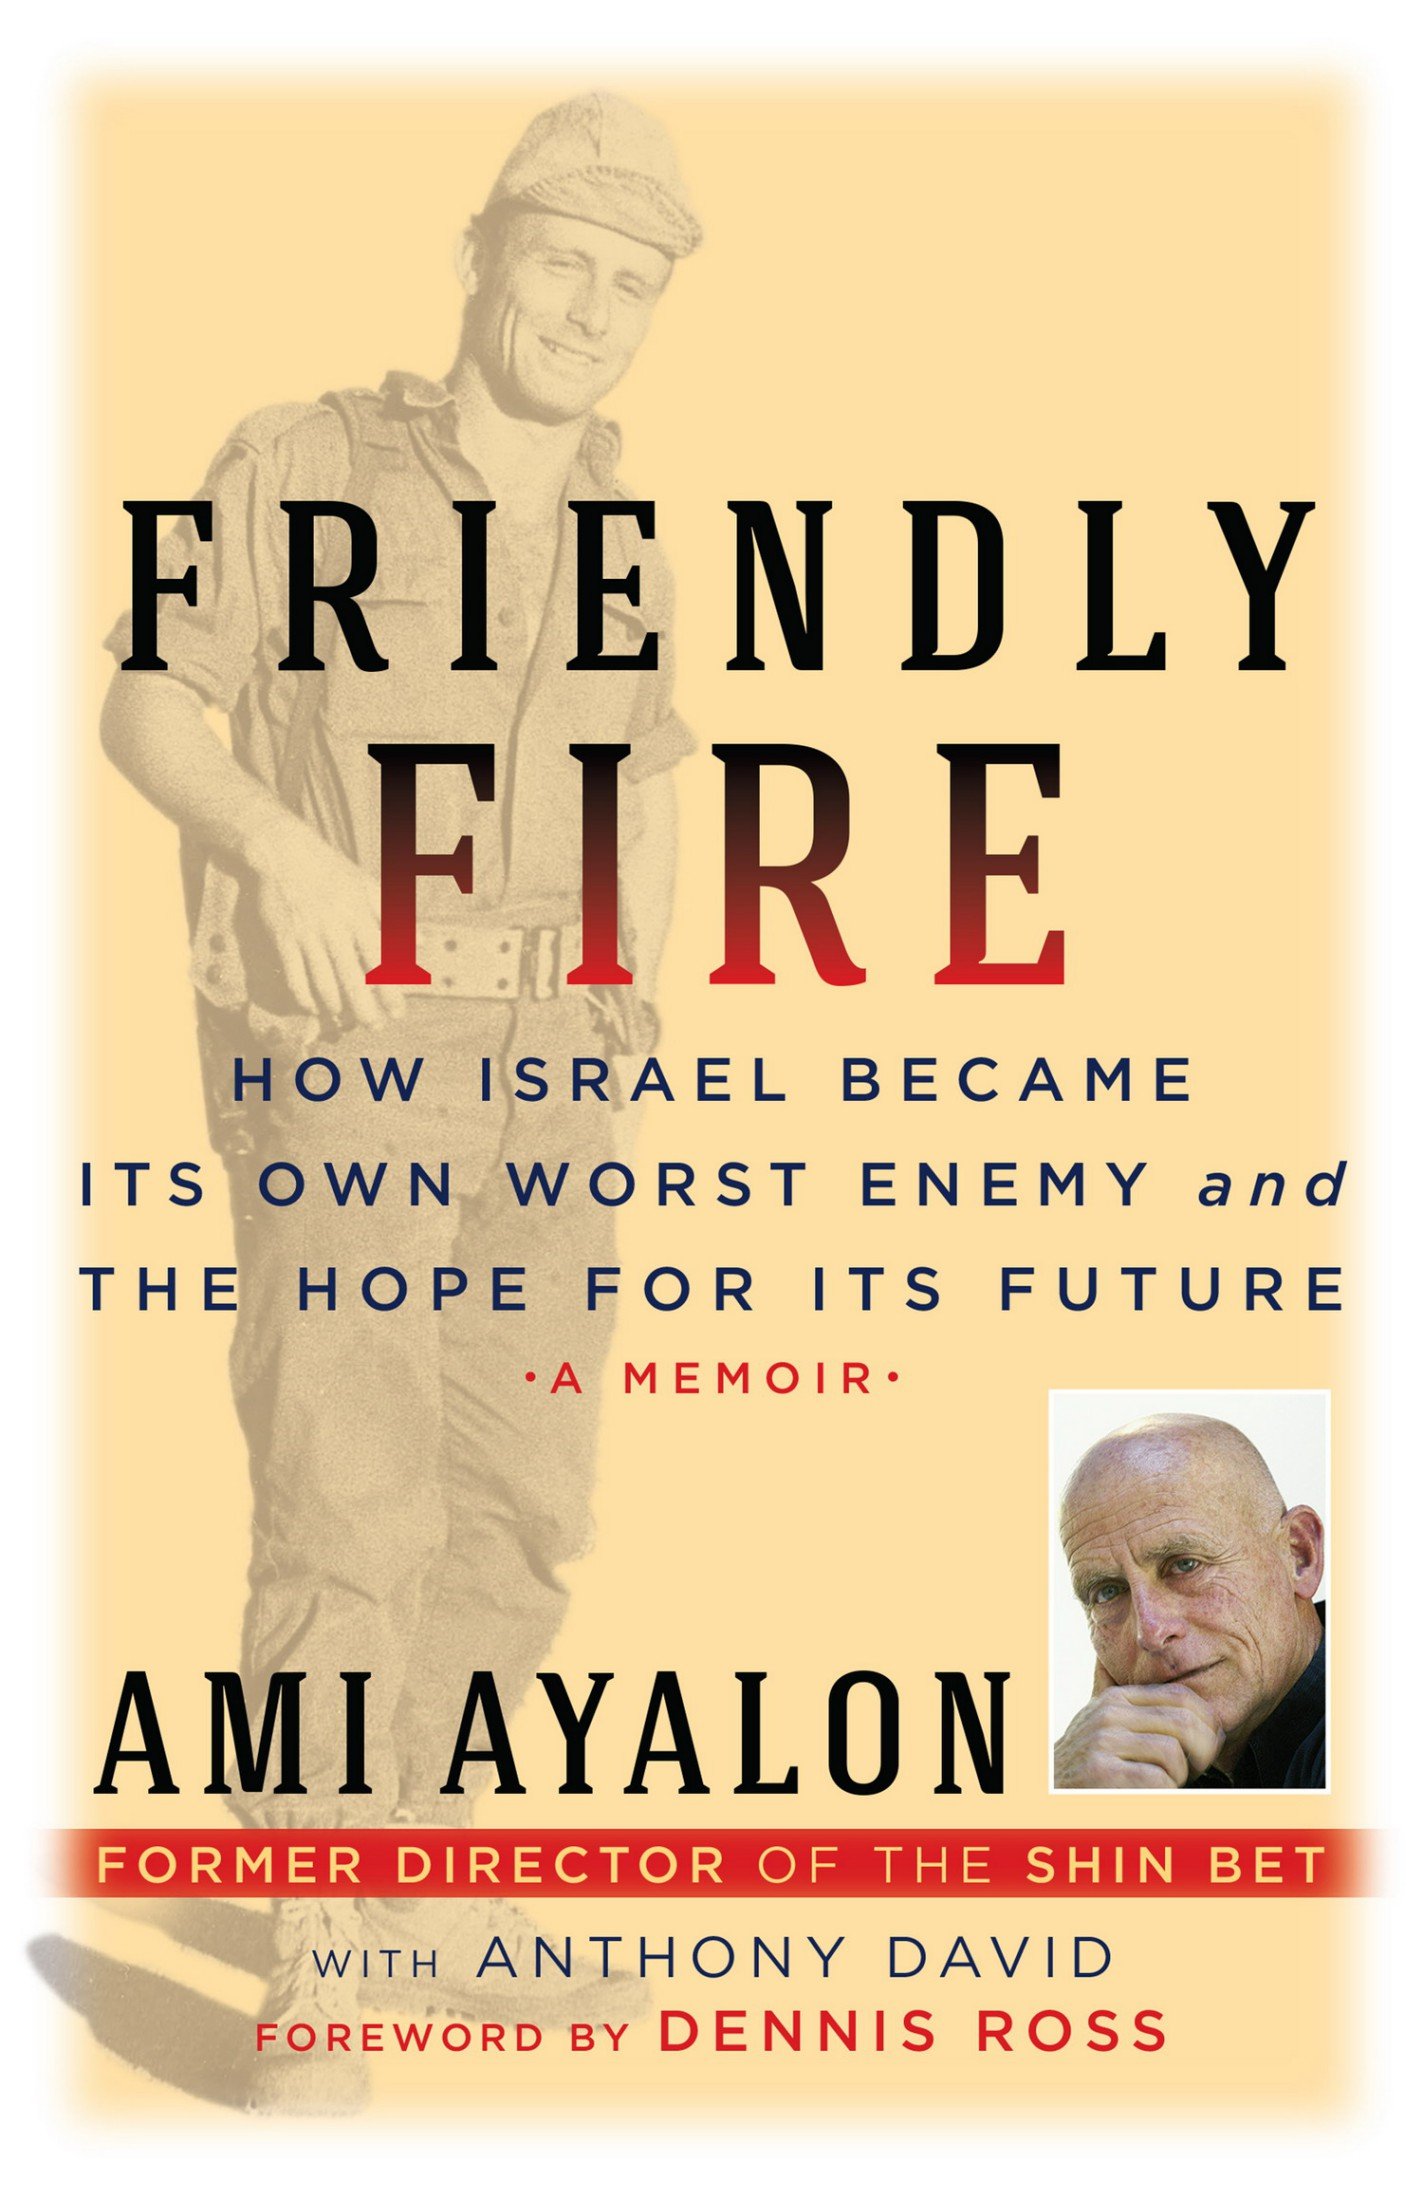 Friendly Fire How Israel Became Its Own Worst Enemy and the Hope for